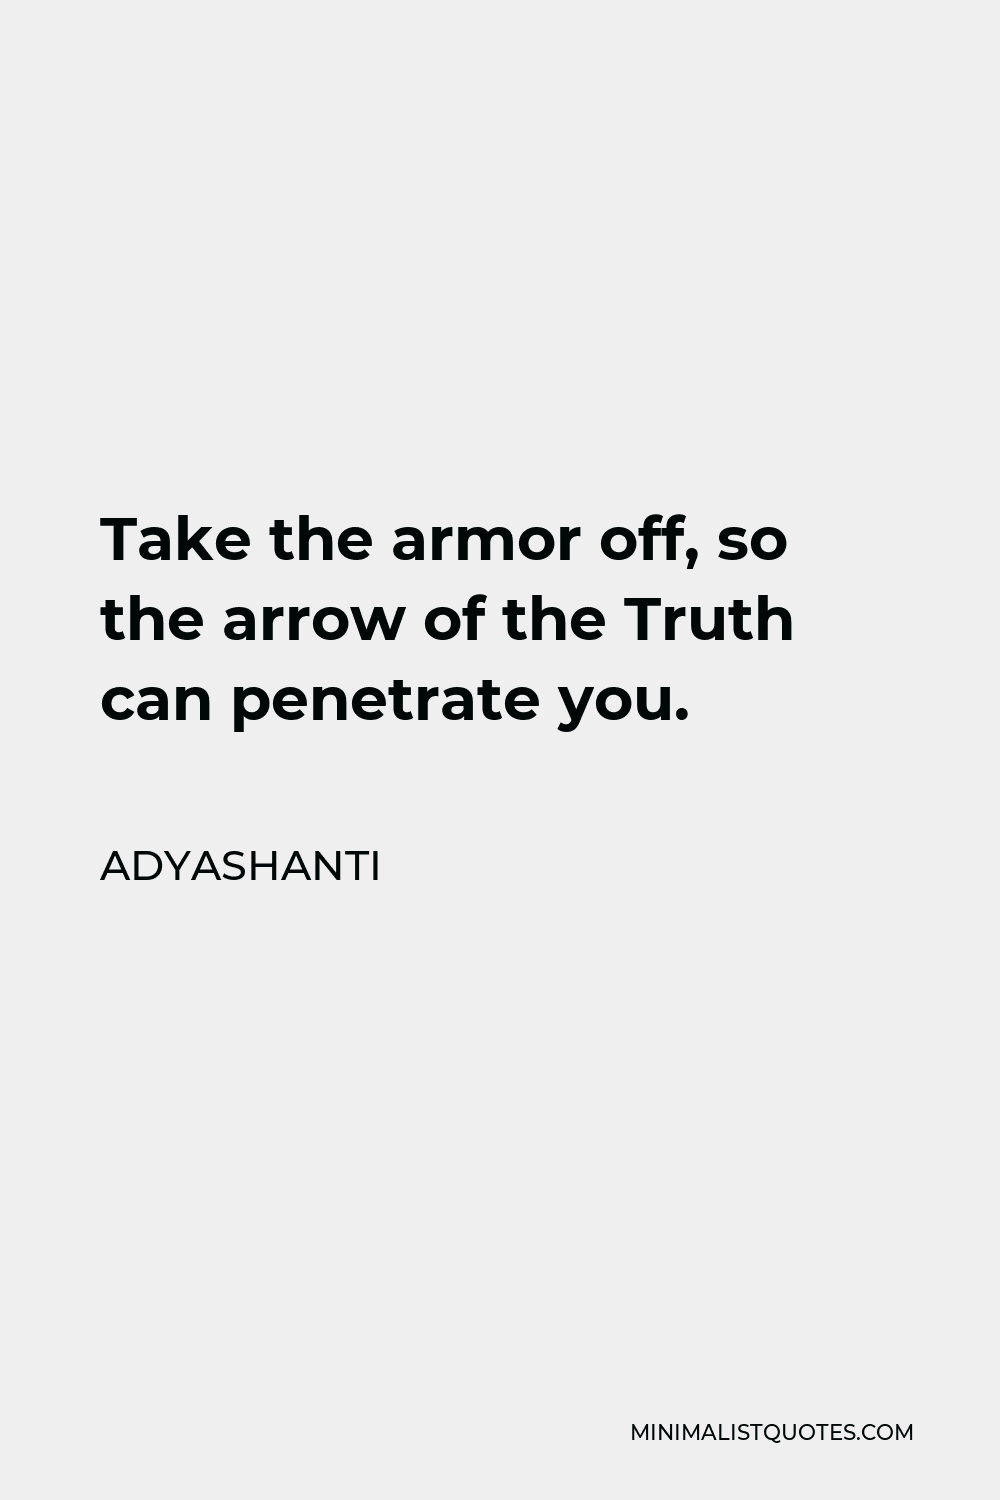 Adyashanti Quote - Take the armor off, so the arrow of the Truth can penetrate you.